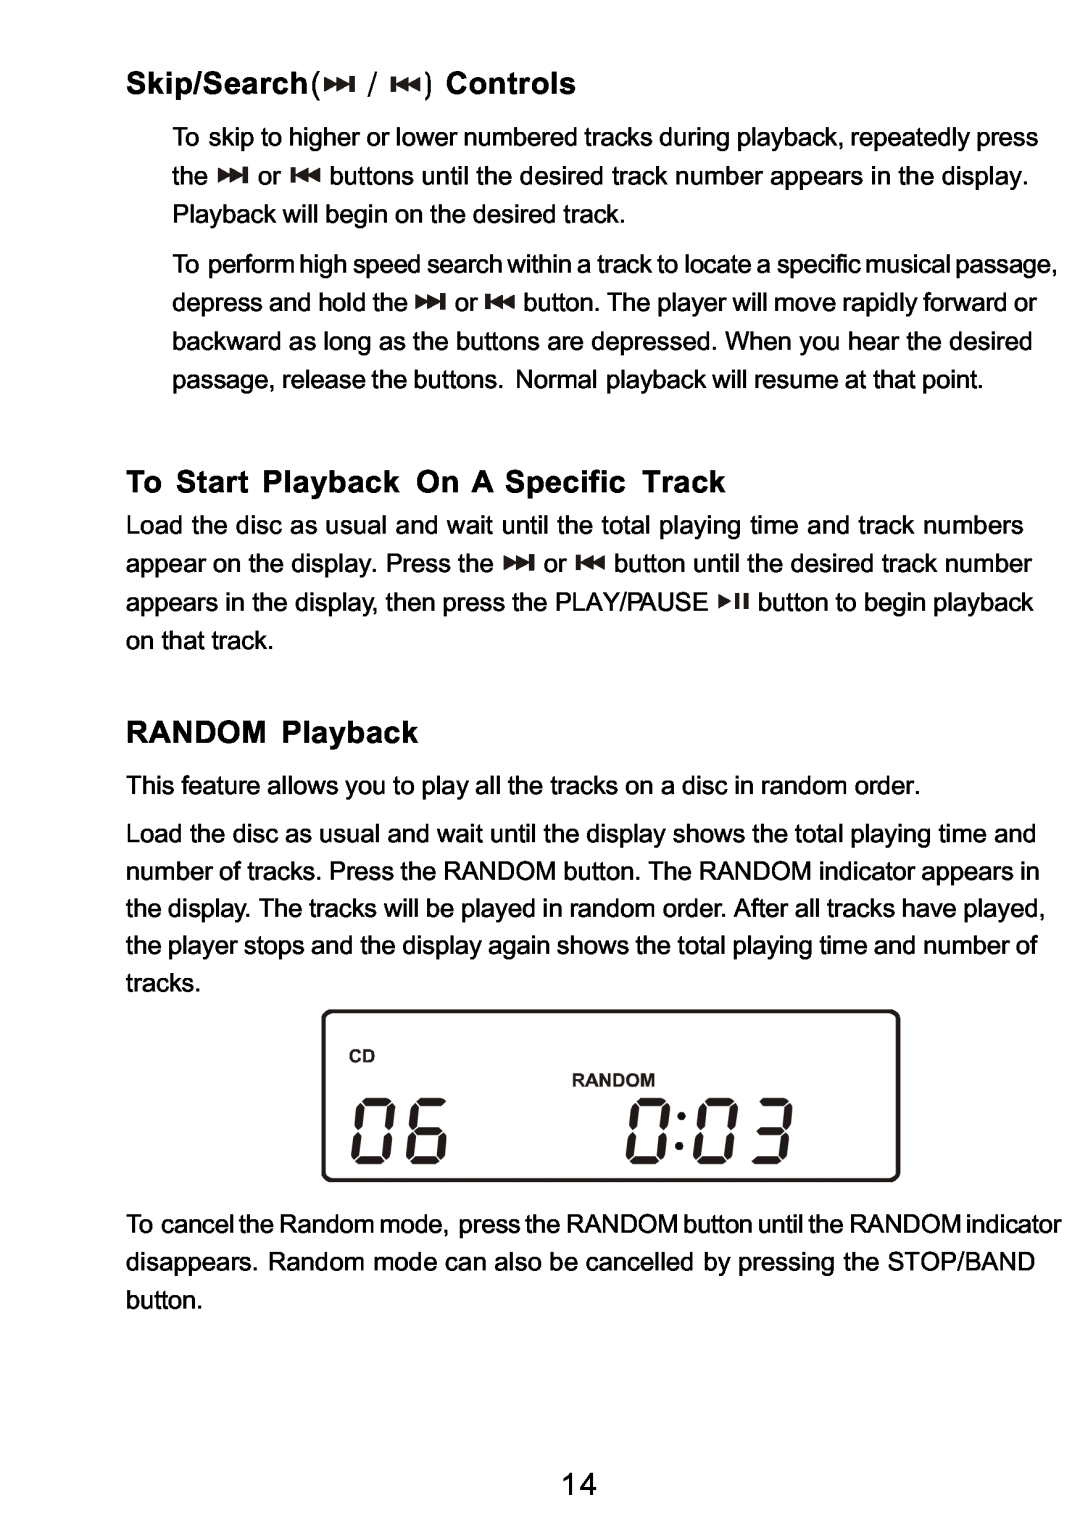 Sylvania SRCD3830 instruction manual Skip/Search / Controls, To Start Playback On A Specific Track, RANDOM Playback 